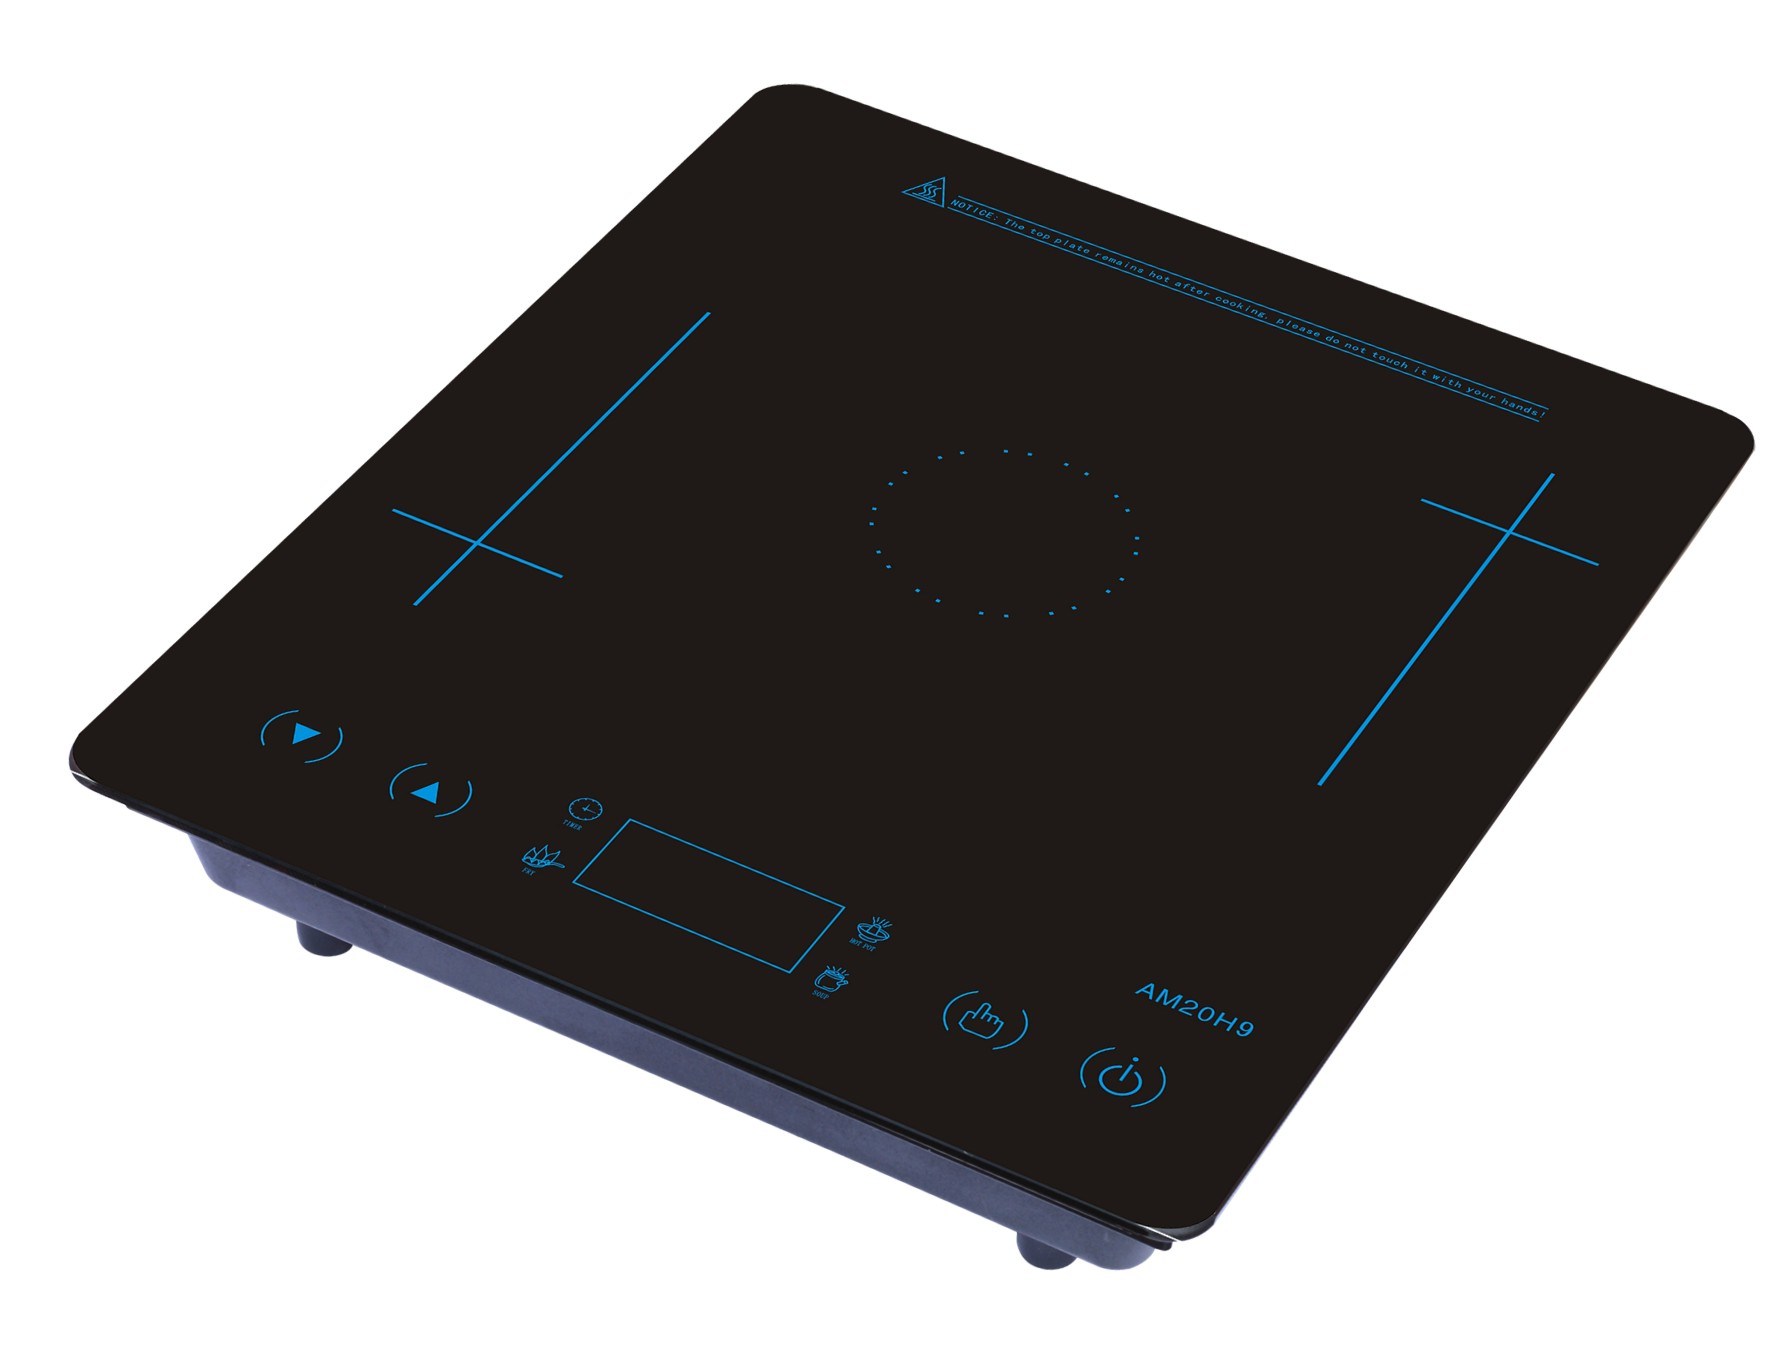 2000W Touch Control Intelligent Induction Hotplate 110V-230V Multi-Function Induction Cooker